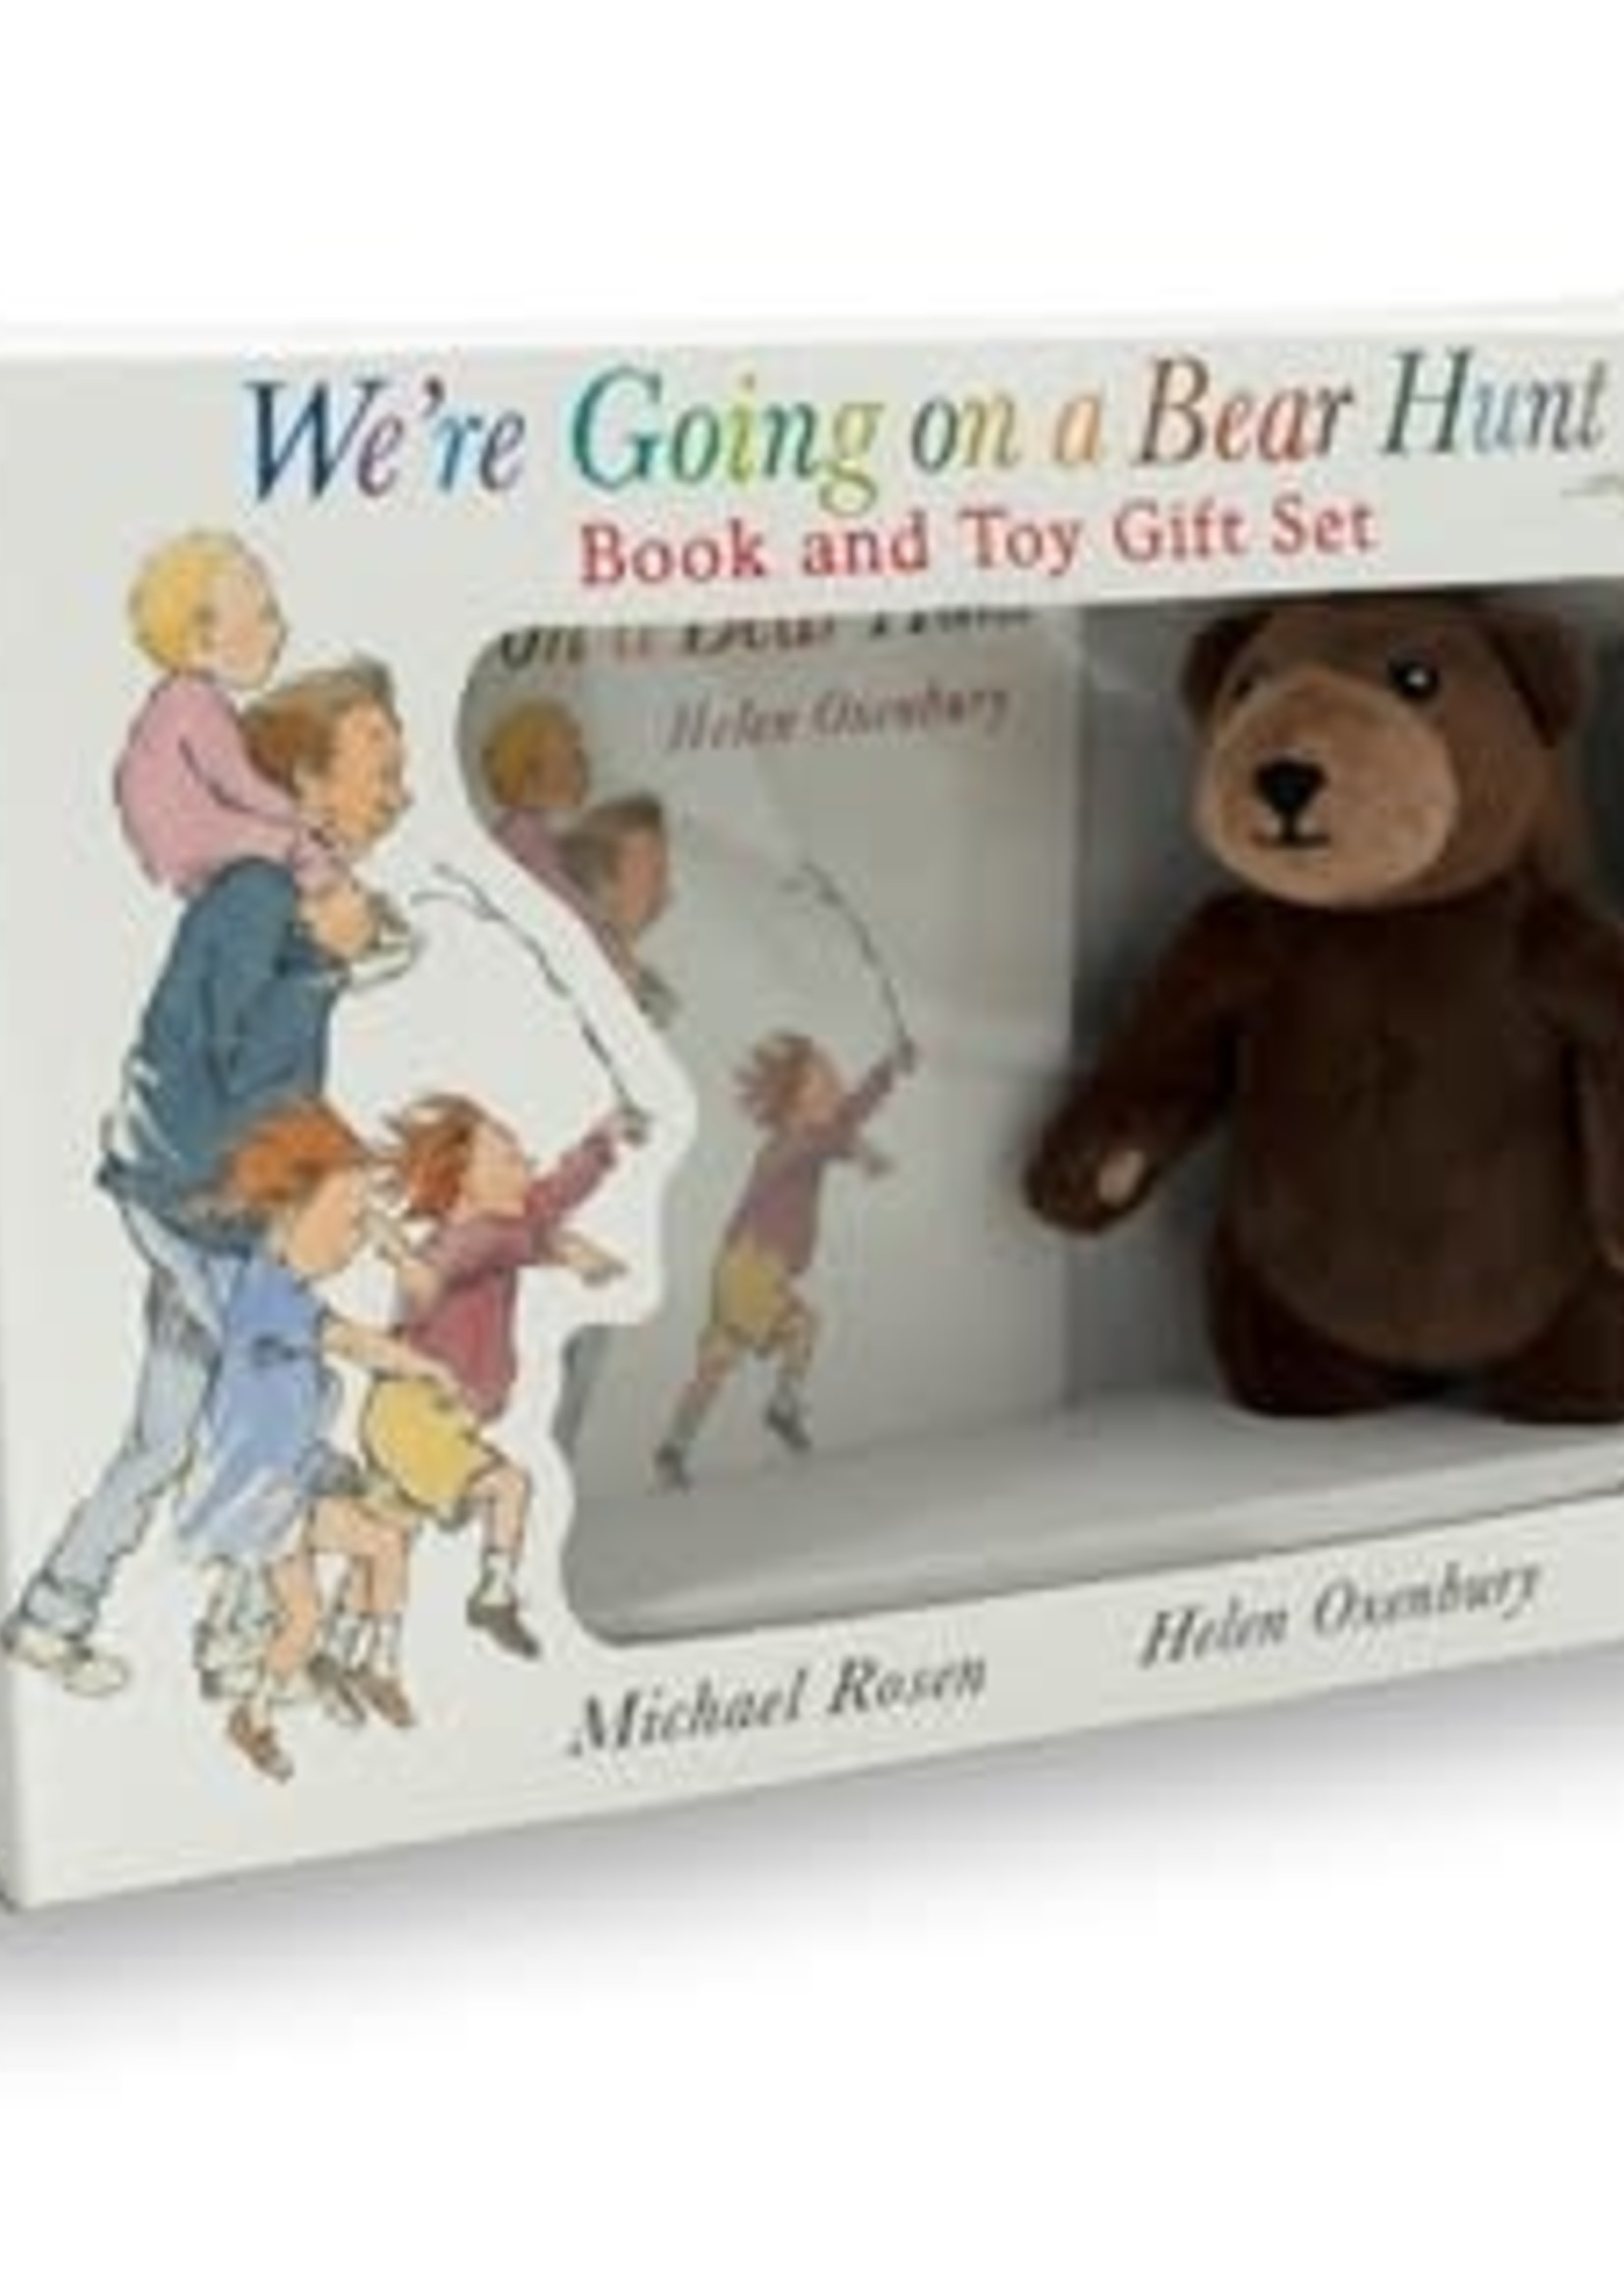 We're Going on a Bear Hunt Book and Toy